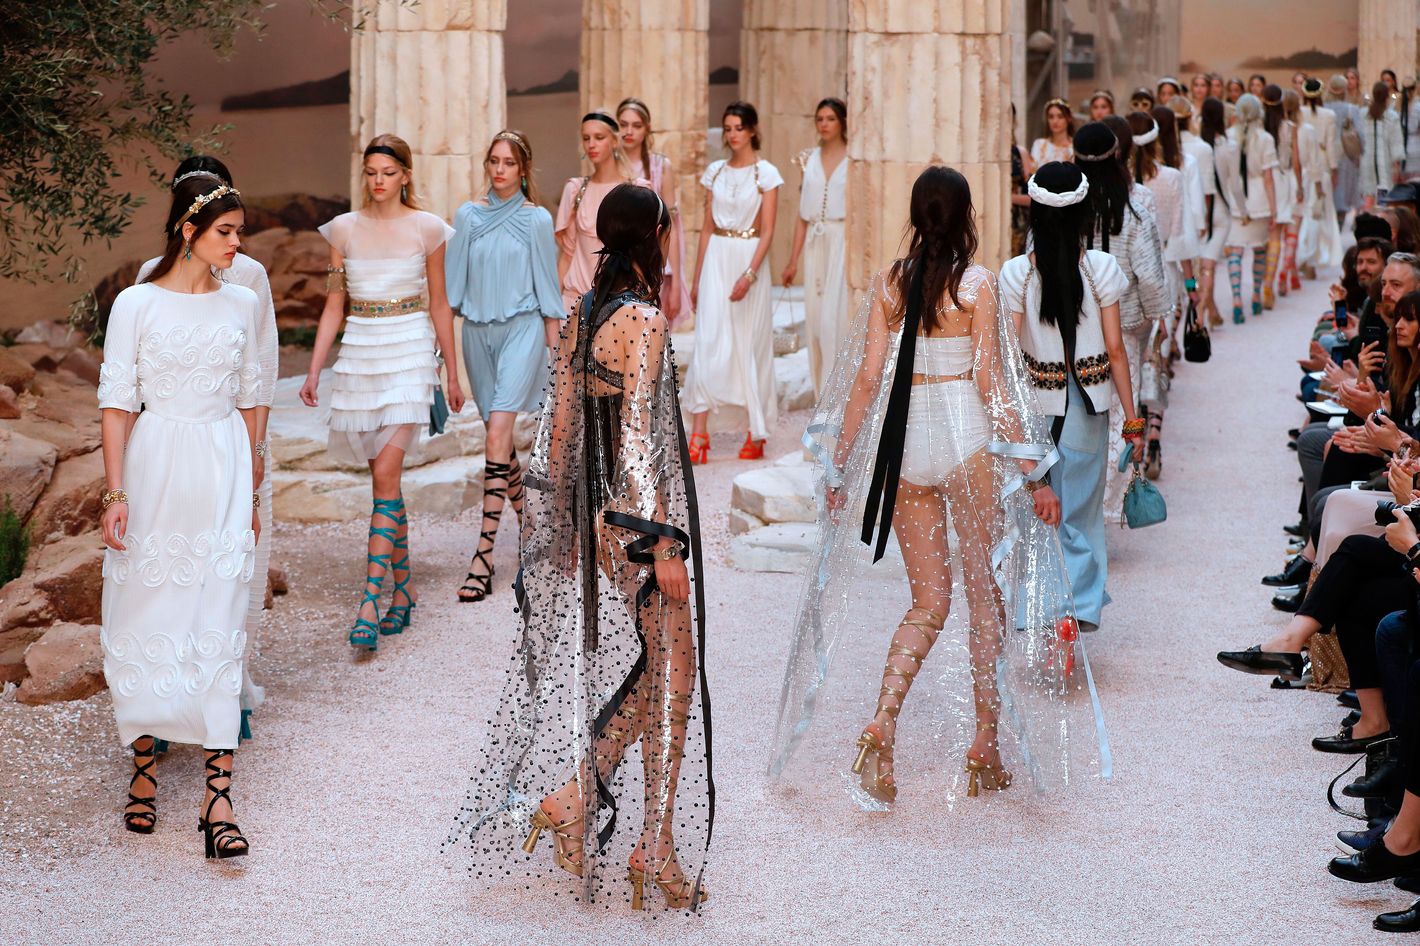 Chanel Cruise 2018 Collection - Chanel Cruise 2018 Ancient Greece in Paris